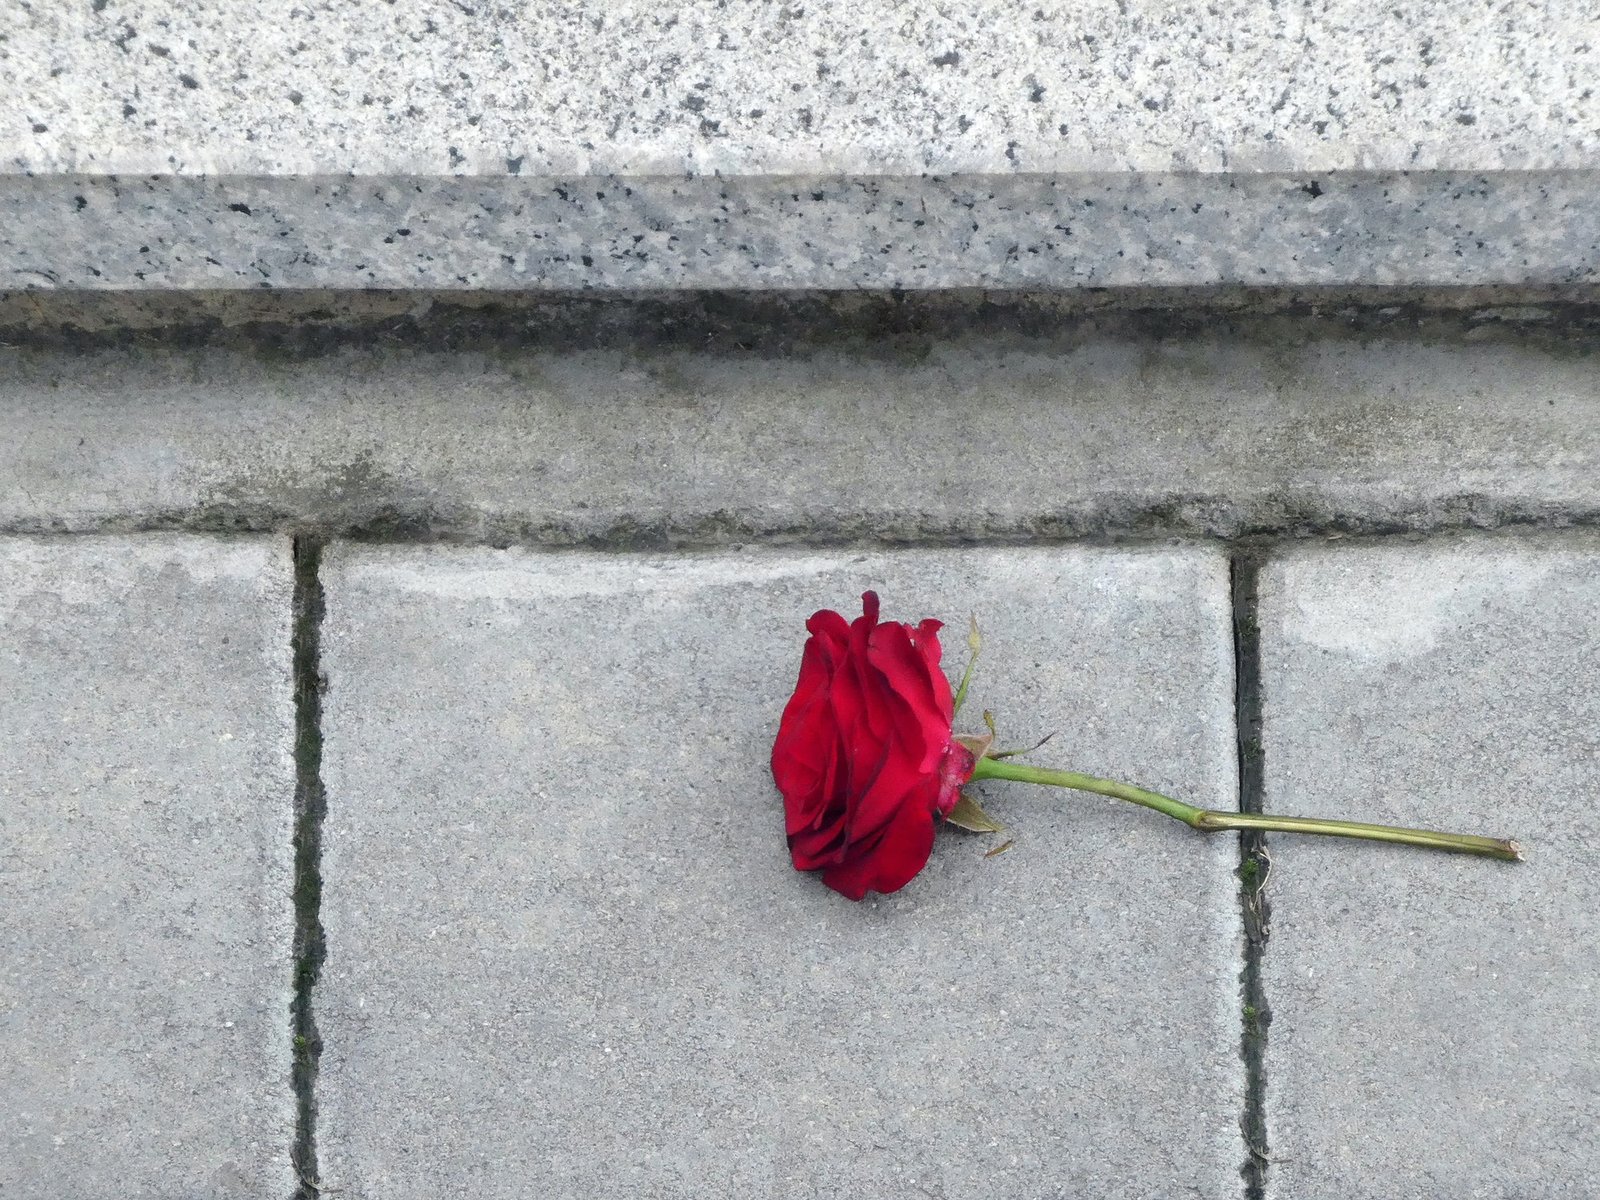 Red rose on the ground in a street - heartbreak concept